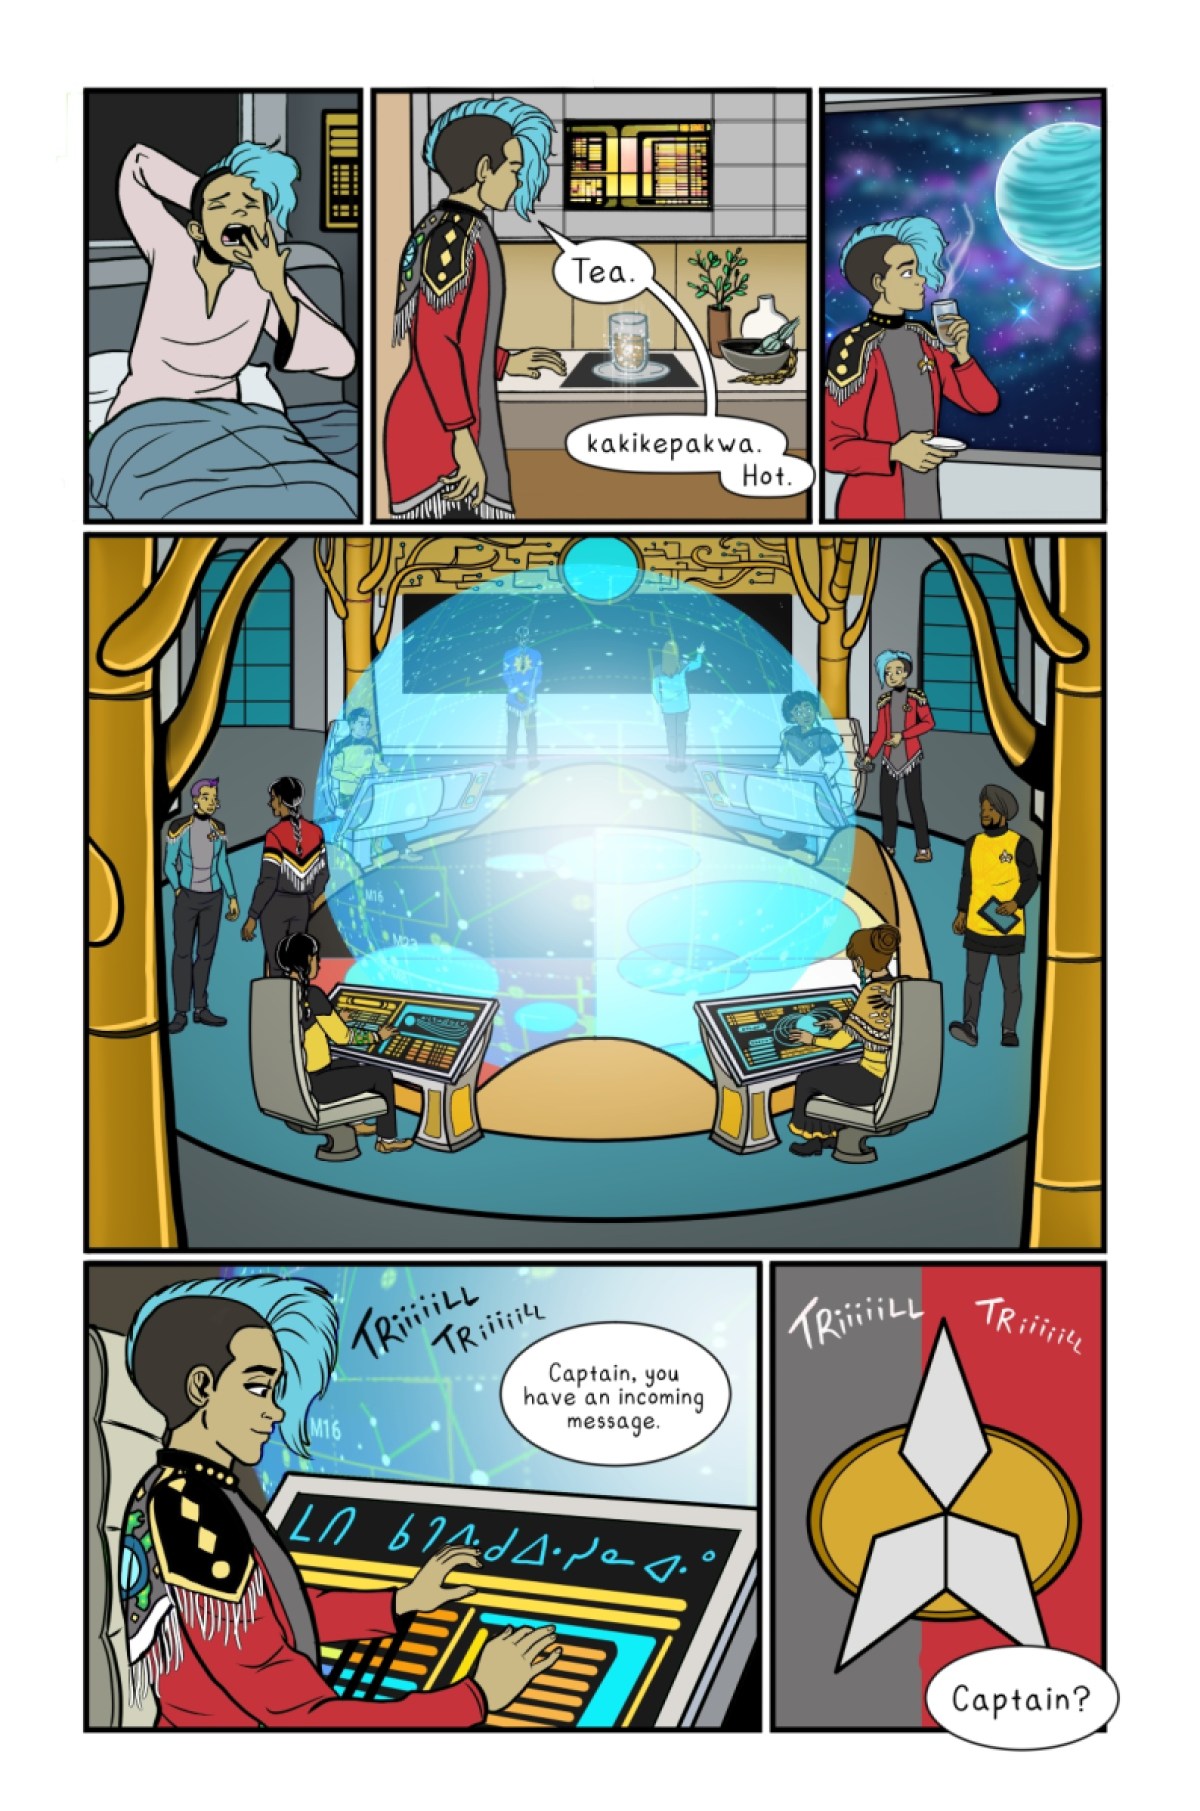 Page 5 of Dorvan V by Alina Pete from Indiginerds